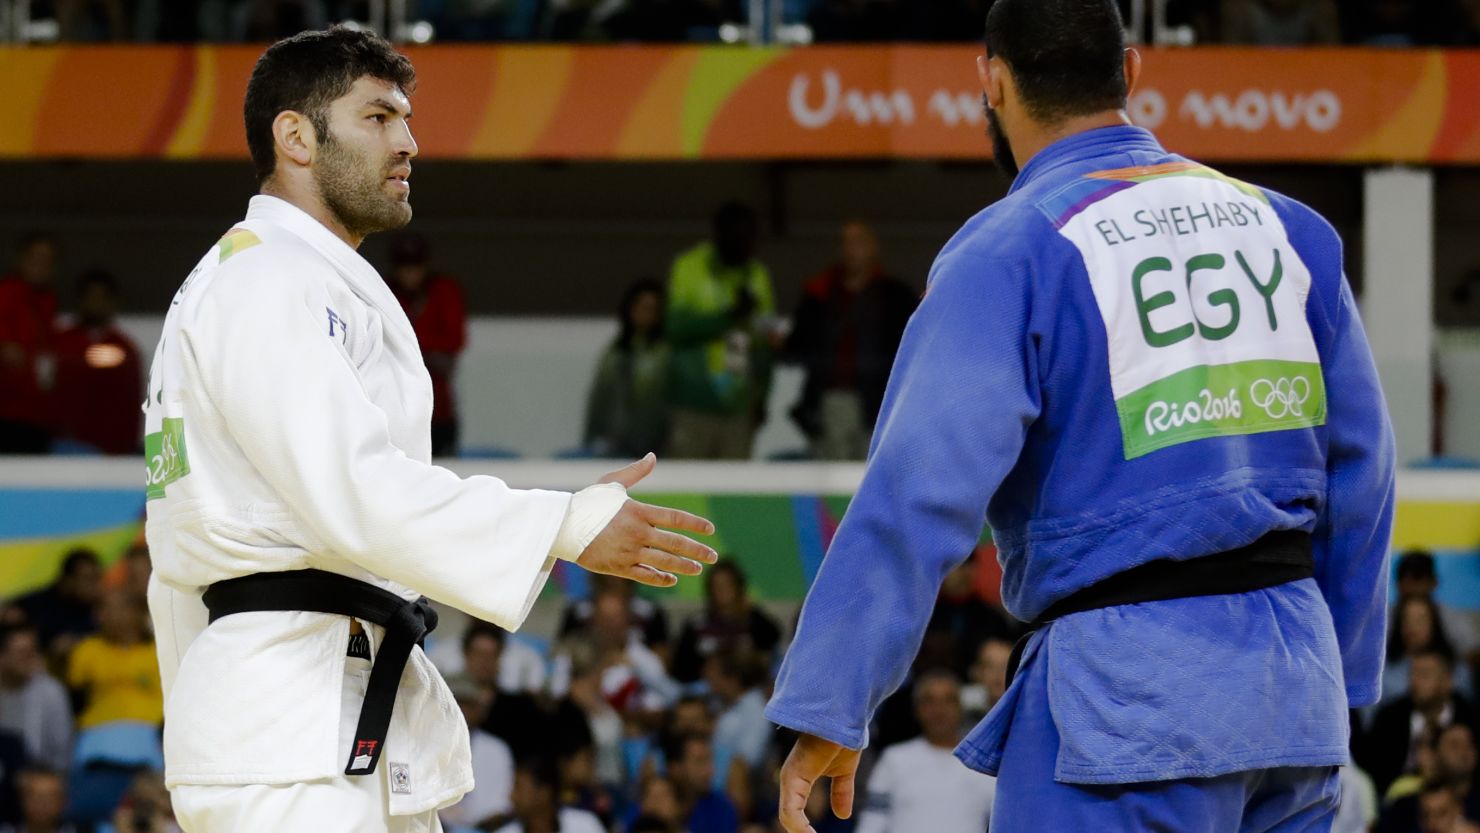 Egypt's Islam El Shehaby, blue, declines to shake hands with Israel's Or Sasson, white, after losing during the men's over 100-kg judo competition at the Rio Olympic Games on Friday, August 12. 